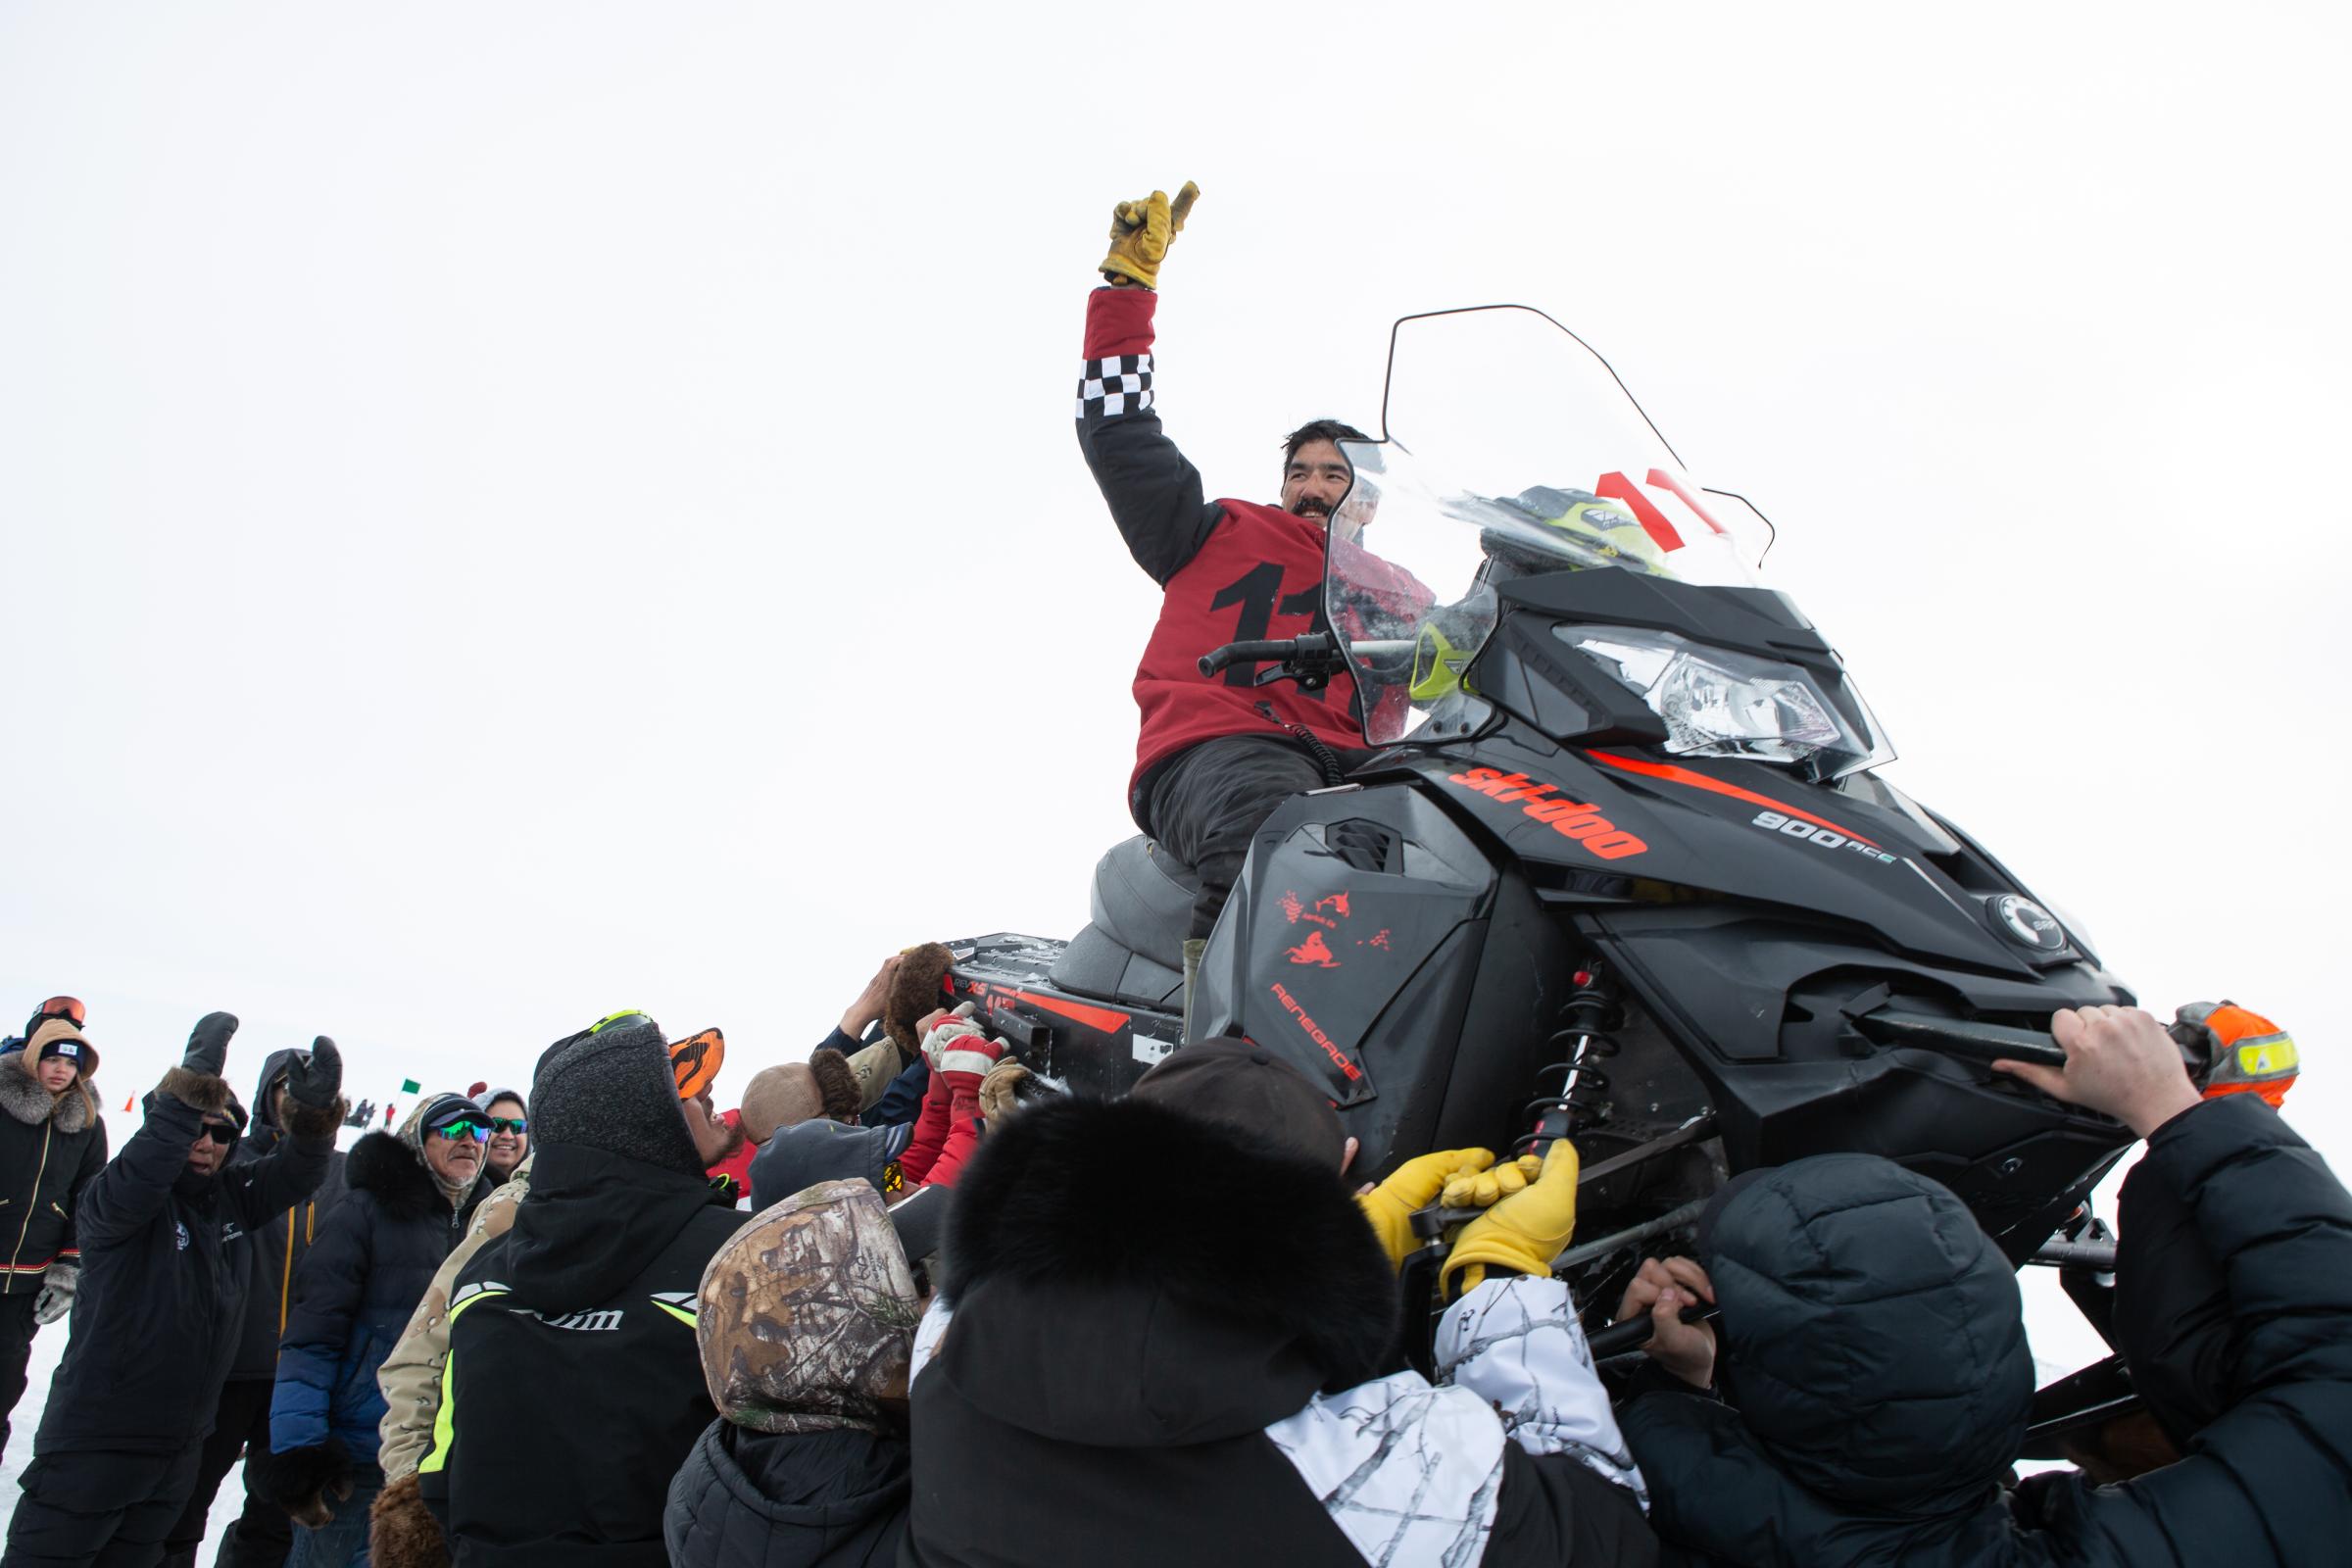 An Arctic blast - The Globe and Mail - Billy Kilabuk celebrates winning the snowmobile race from...